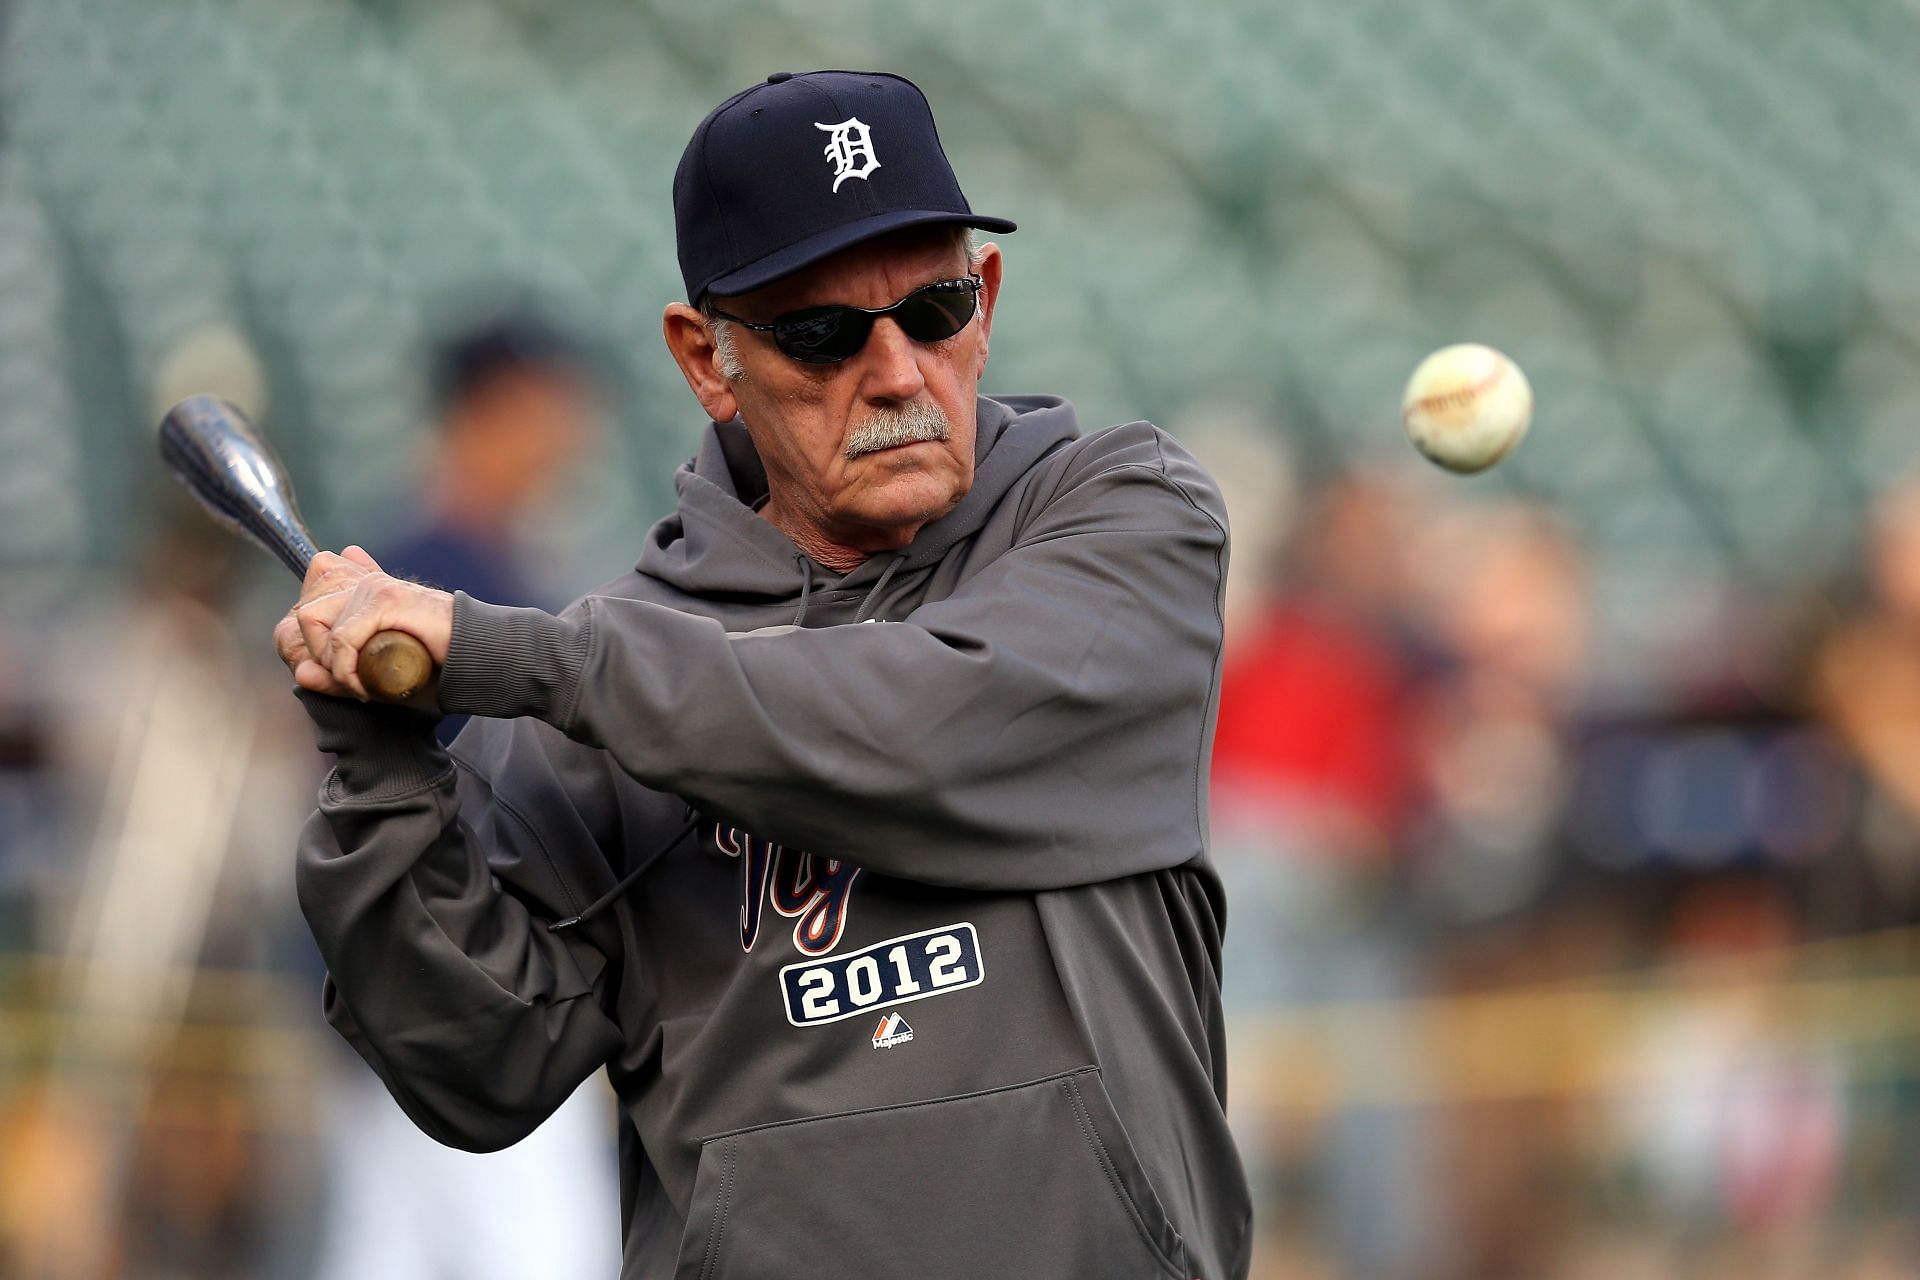 Jim Leyland says he'd play Davis over Hedges and shares his